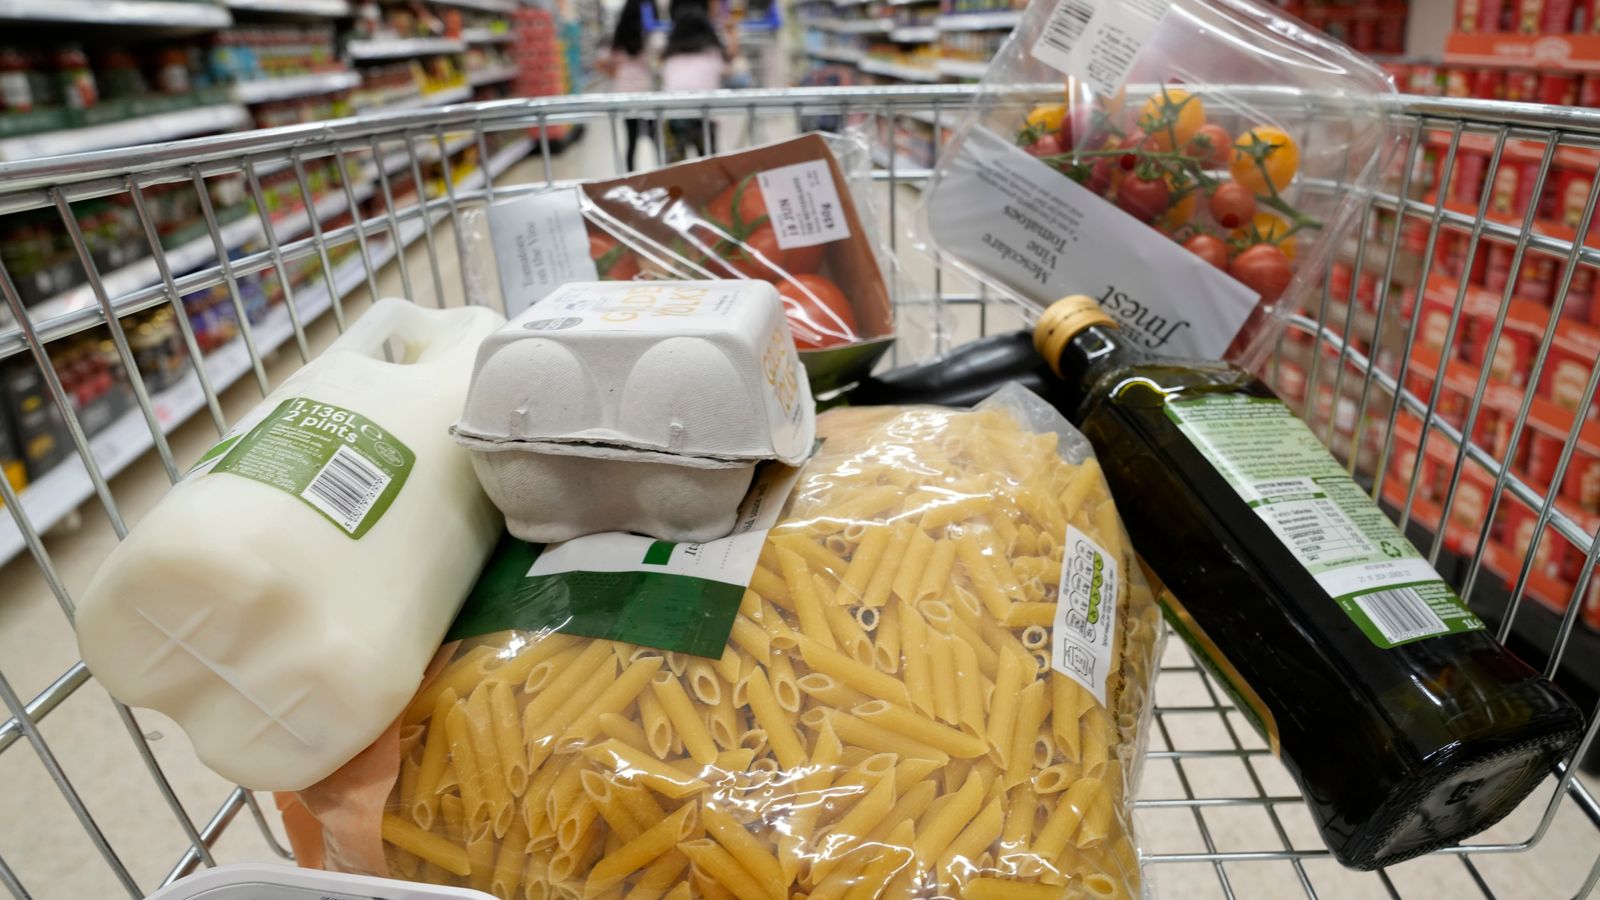 'Optimism' as food price inflation slows to lowest level this year